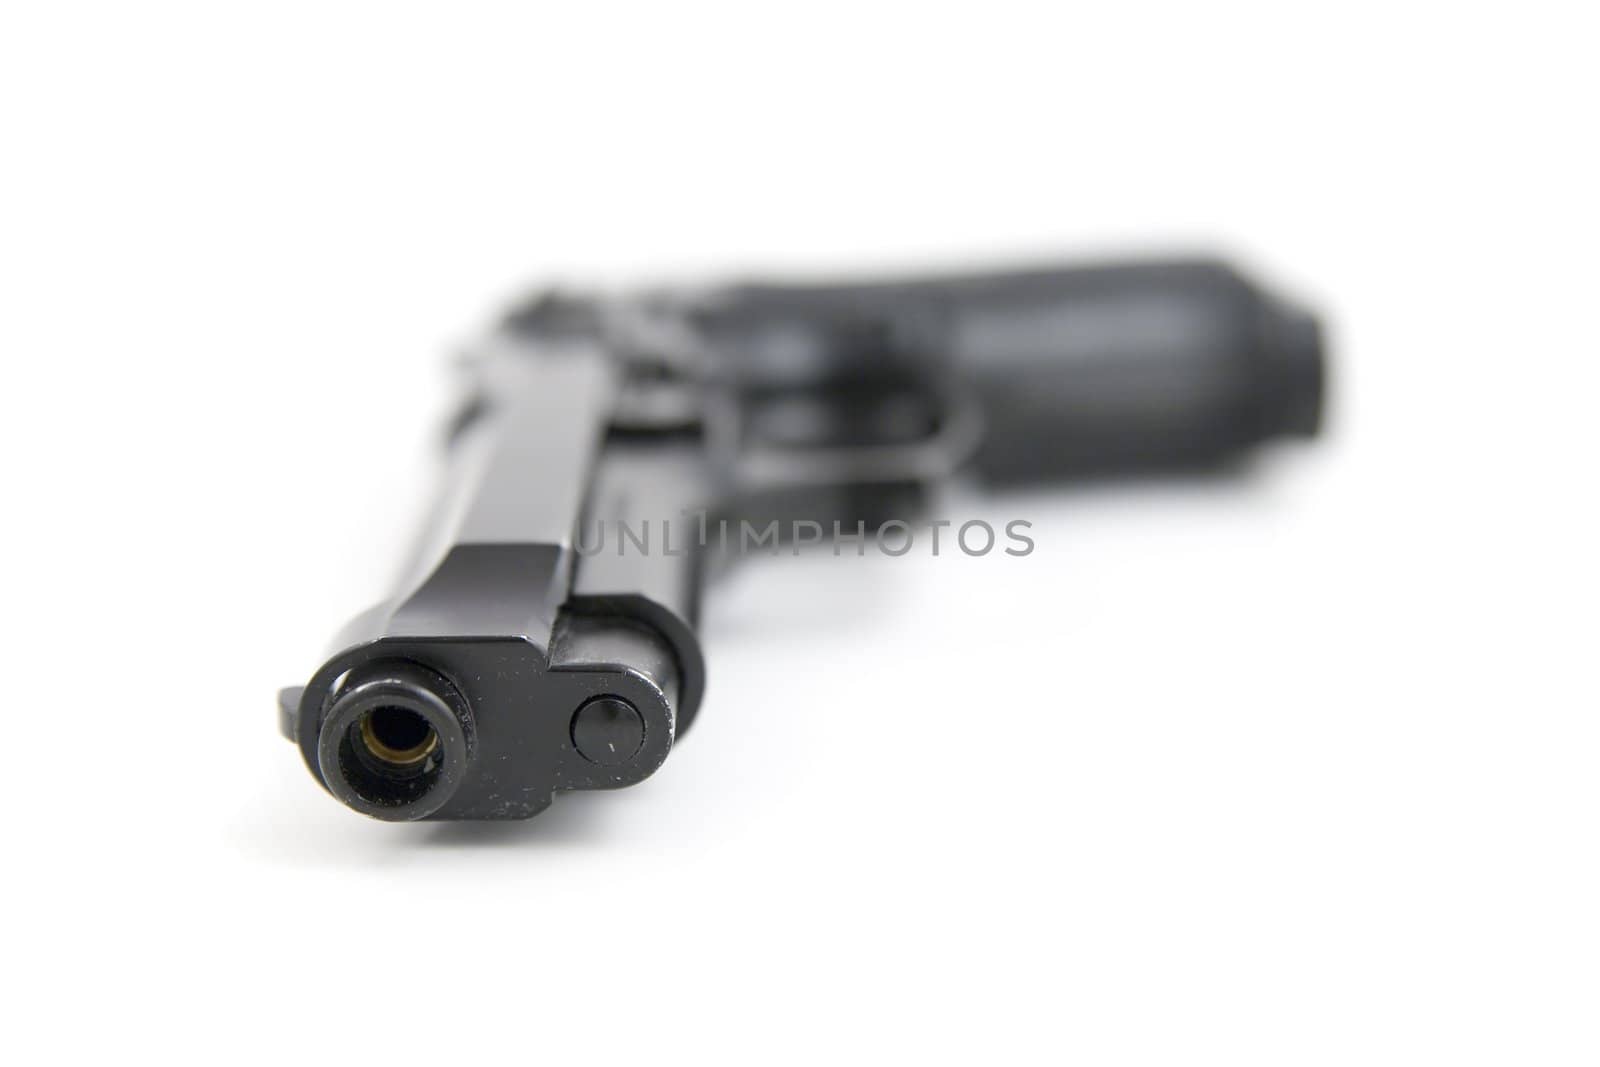 asg gun isolated on white background